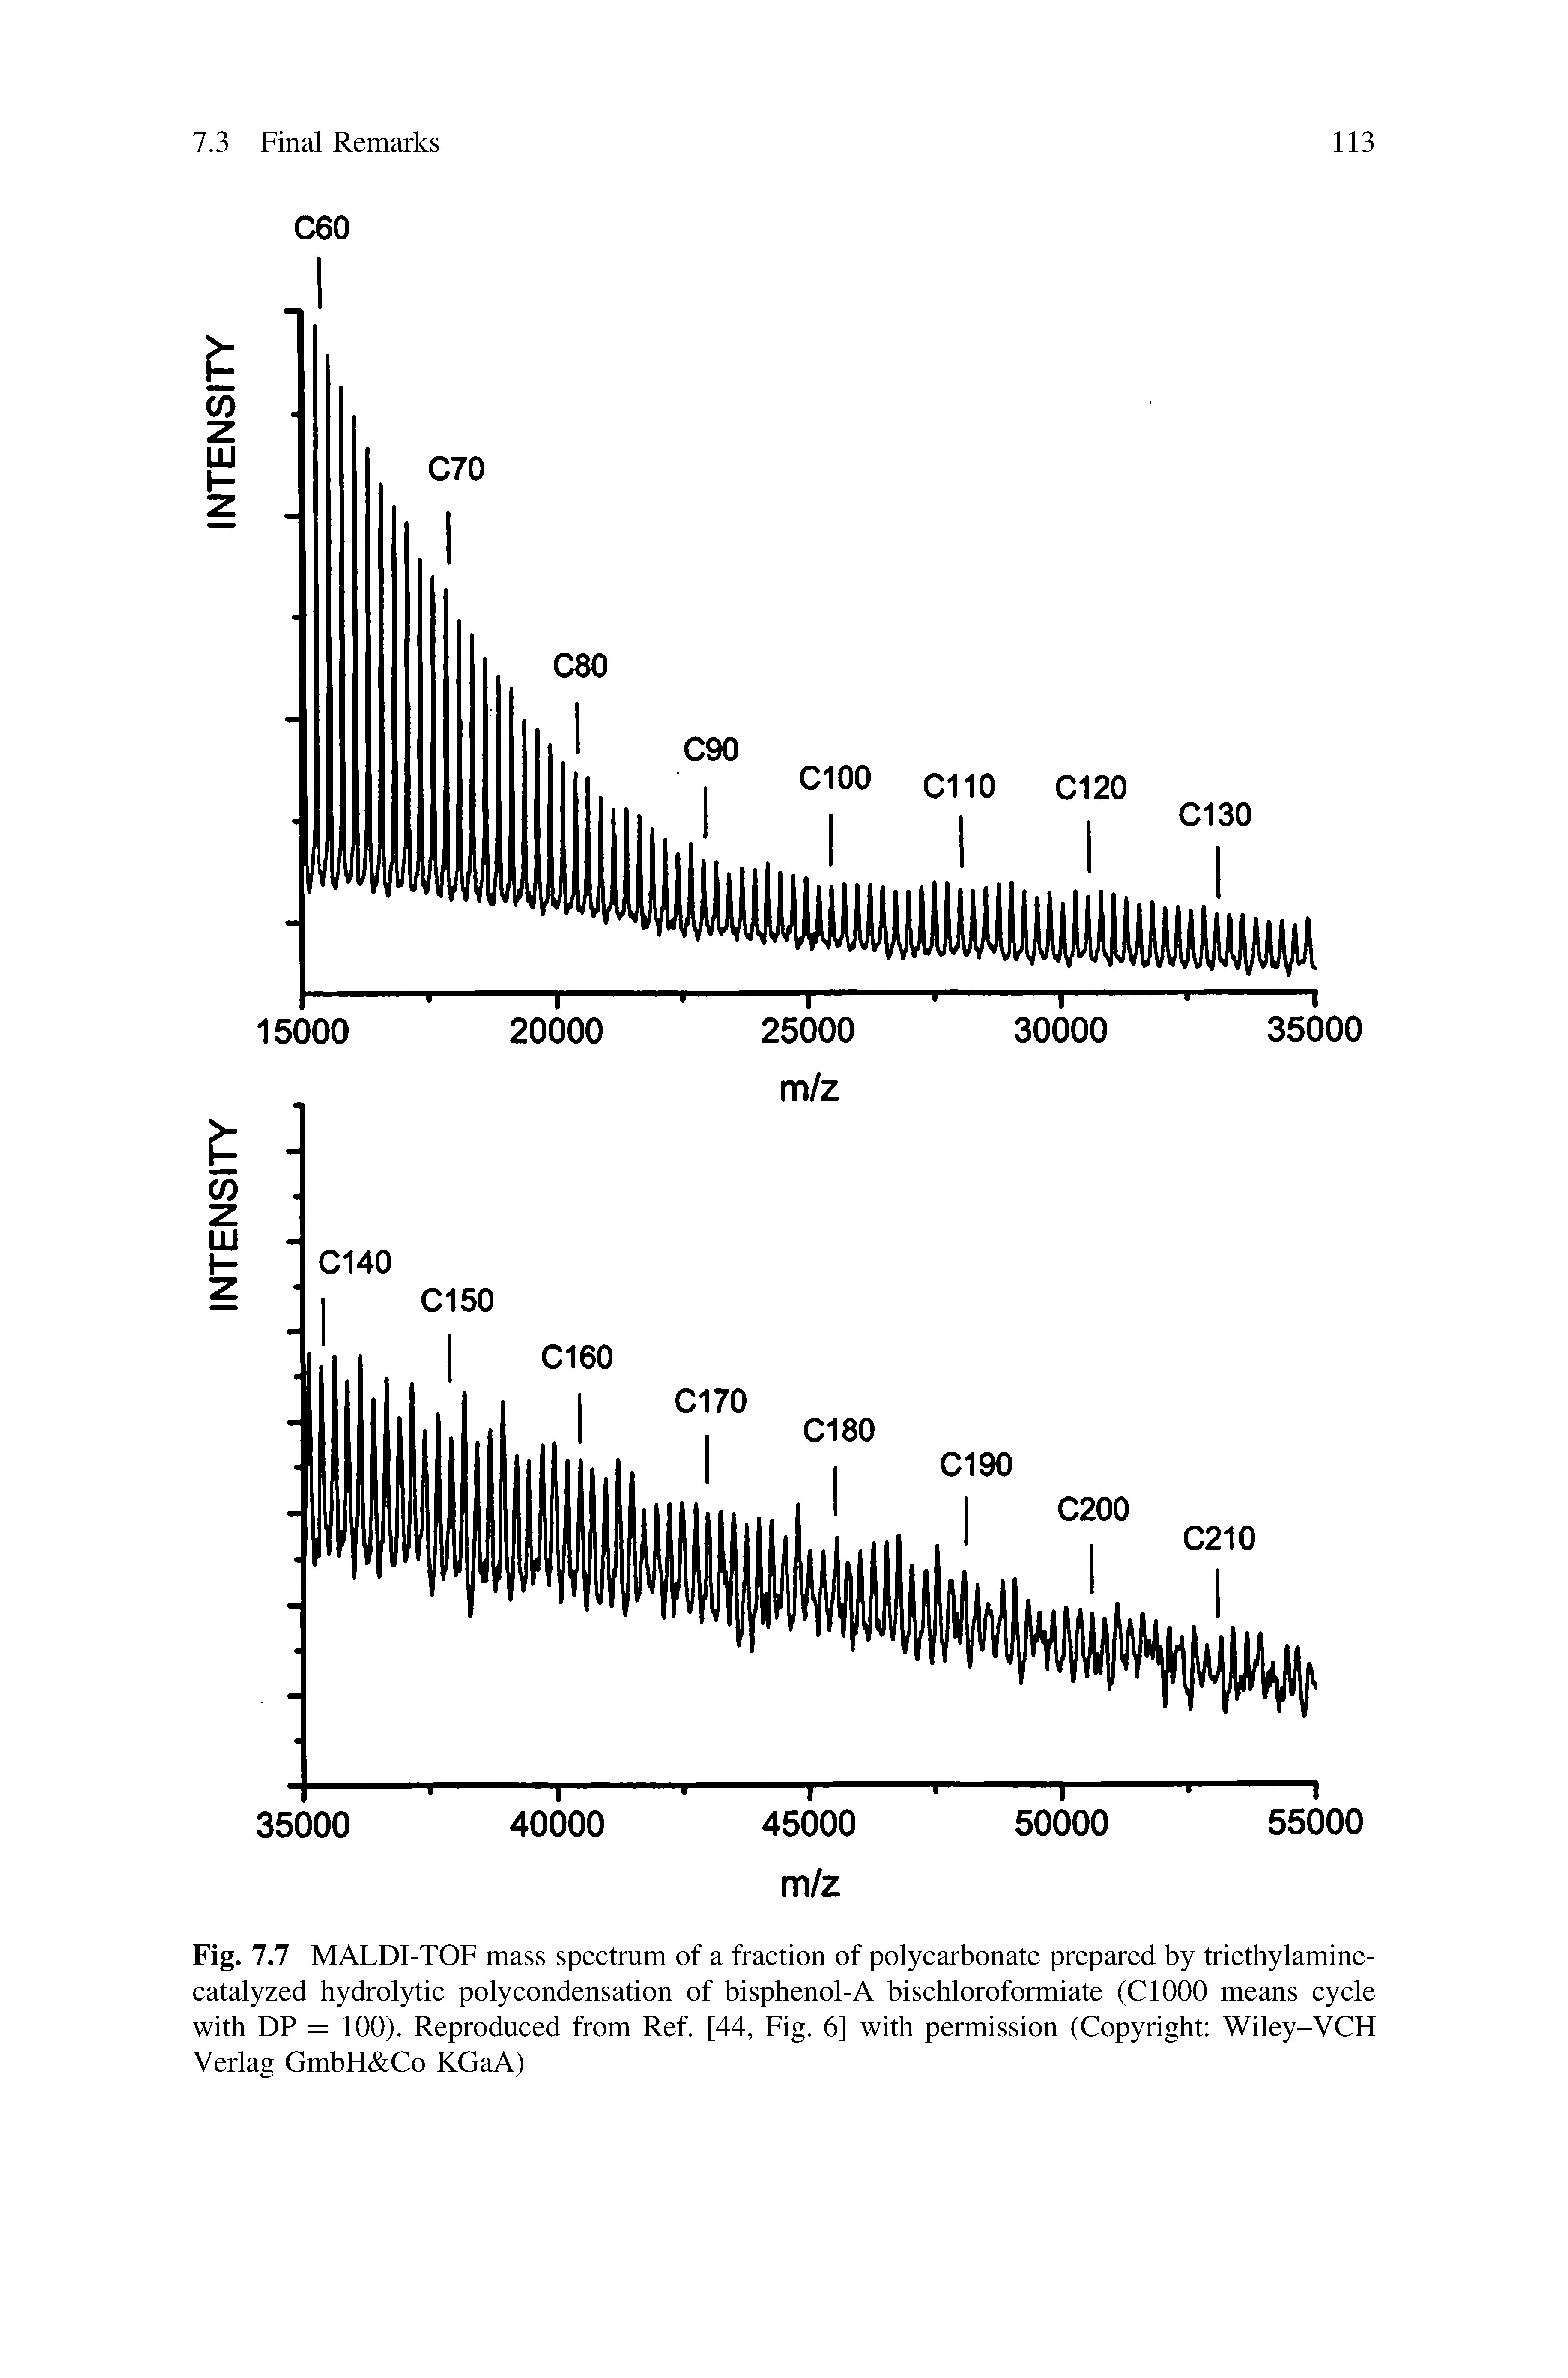 Fig. 7.7 MALDI-TOF mass spectrum of a fraction of polycarbonate prepared by triethylamine-catalyzed hydrolytic poly condensation of bisphenol-A bischloroformiate (Cl000 means cycle with DP = 100). Reproduced from Ref. [44, Fig. 6] with permission (Copyright Wiley-VCH Verlag GmbH Co KGaA)...